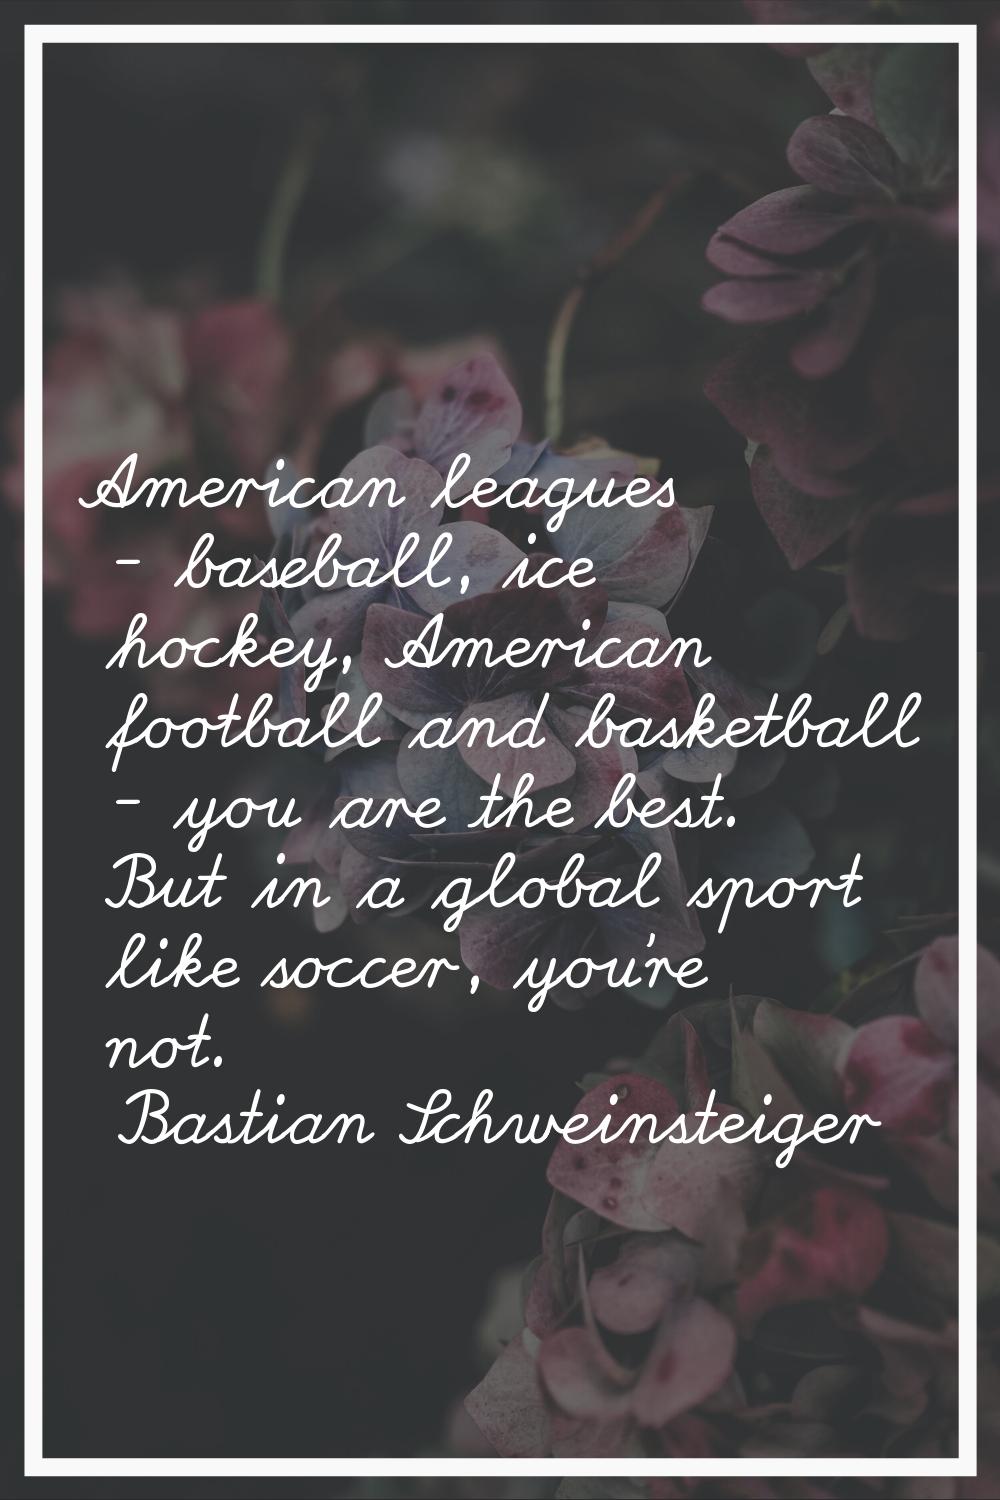 American leagues - baseball, ice hockey, American football and basketball - you are the best. But i